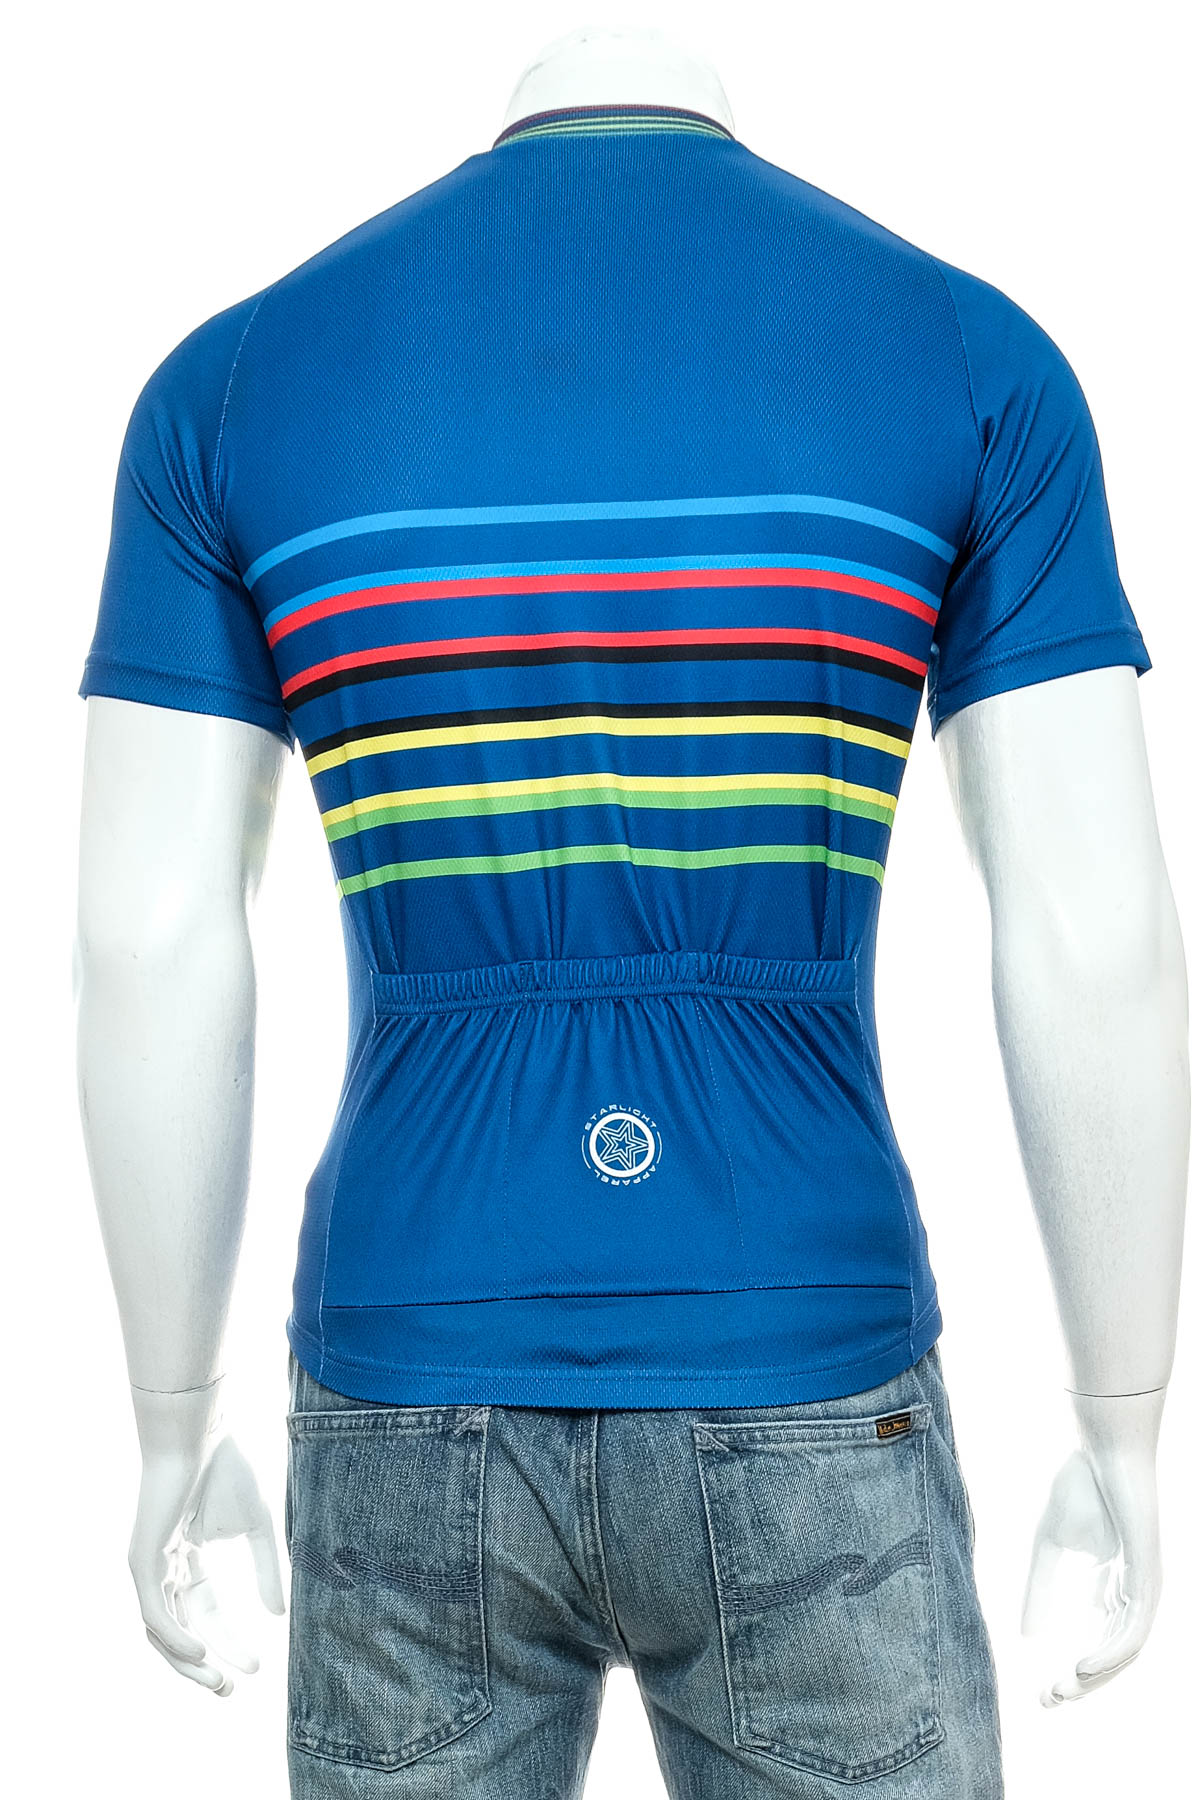 Male sports top for cycling - STARLIGHT - 1